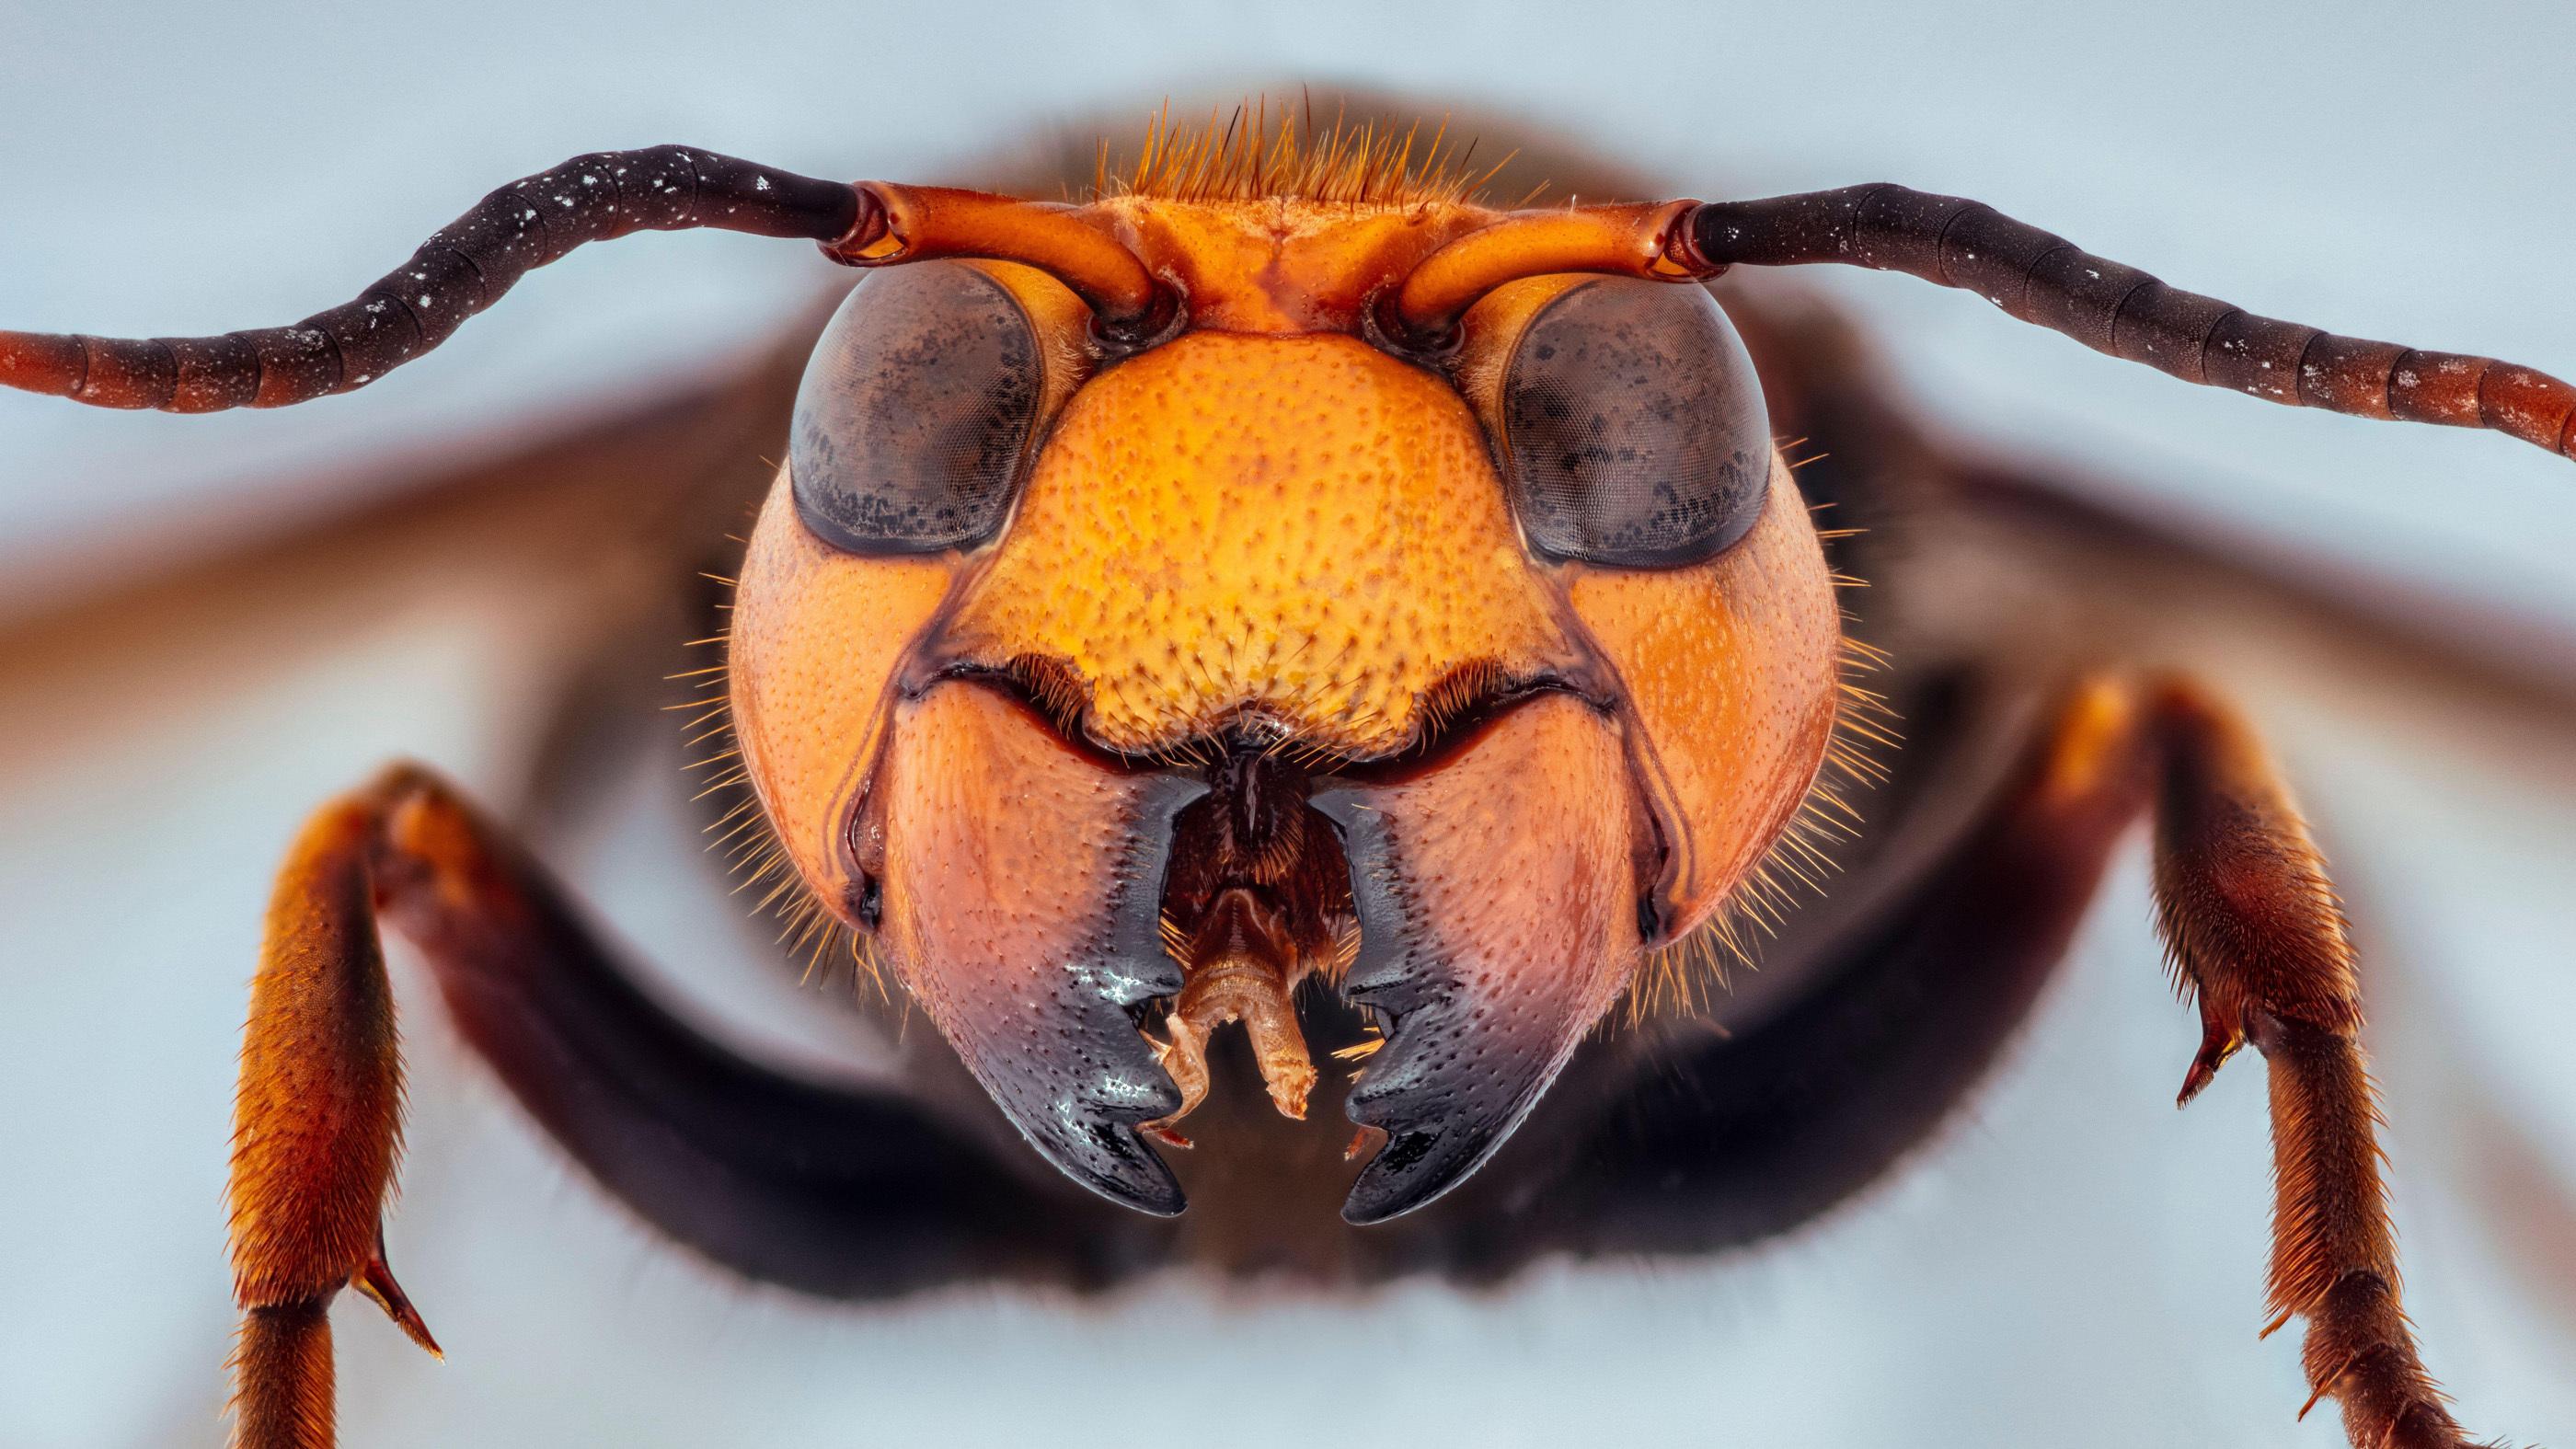 Adults of the Asian giant hornet can be distinguished from other hornets by their big “cheeks” (which hold muscles for savage biting), teardrop-shaped eyes and a scalloped structure above the mandibles in between the eyes.